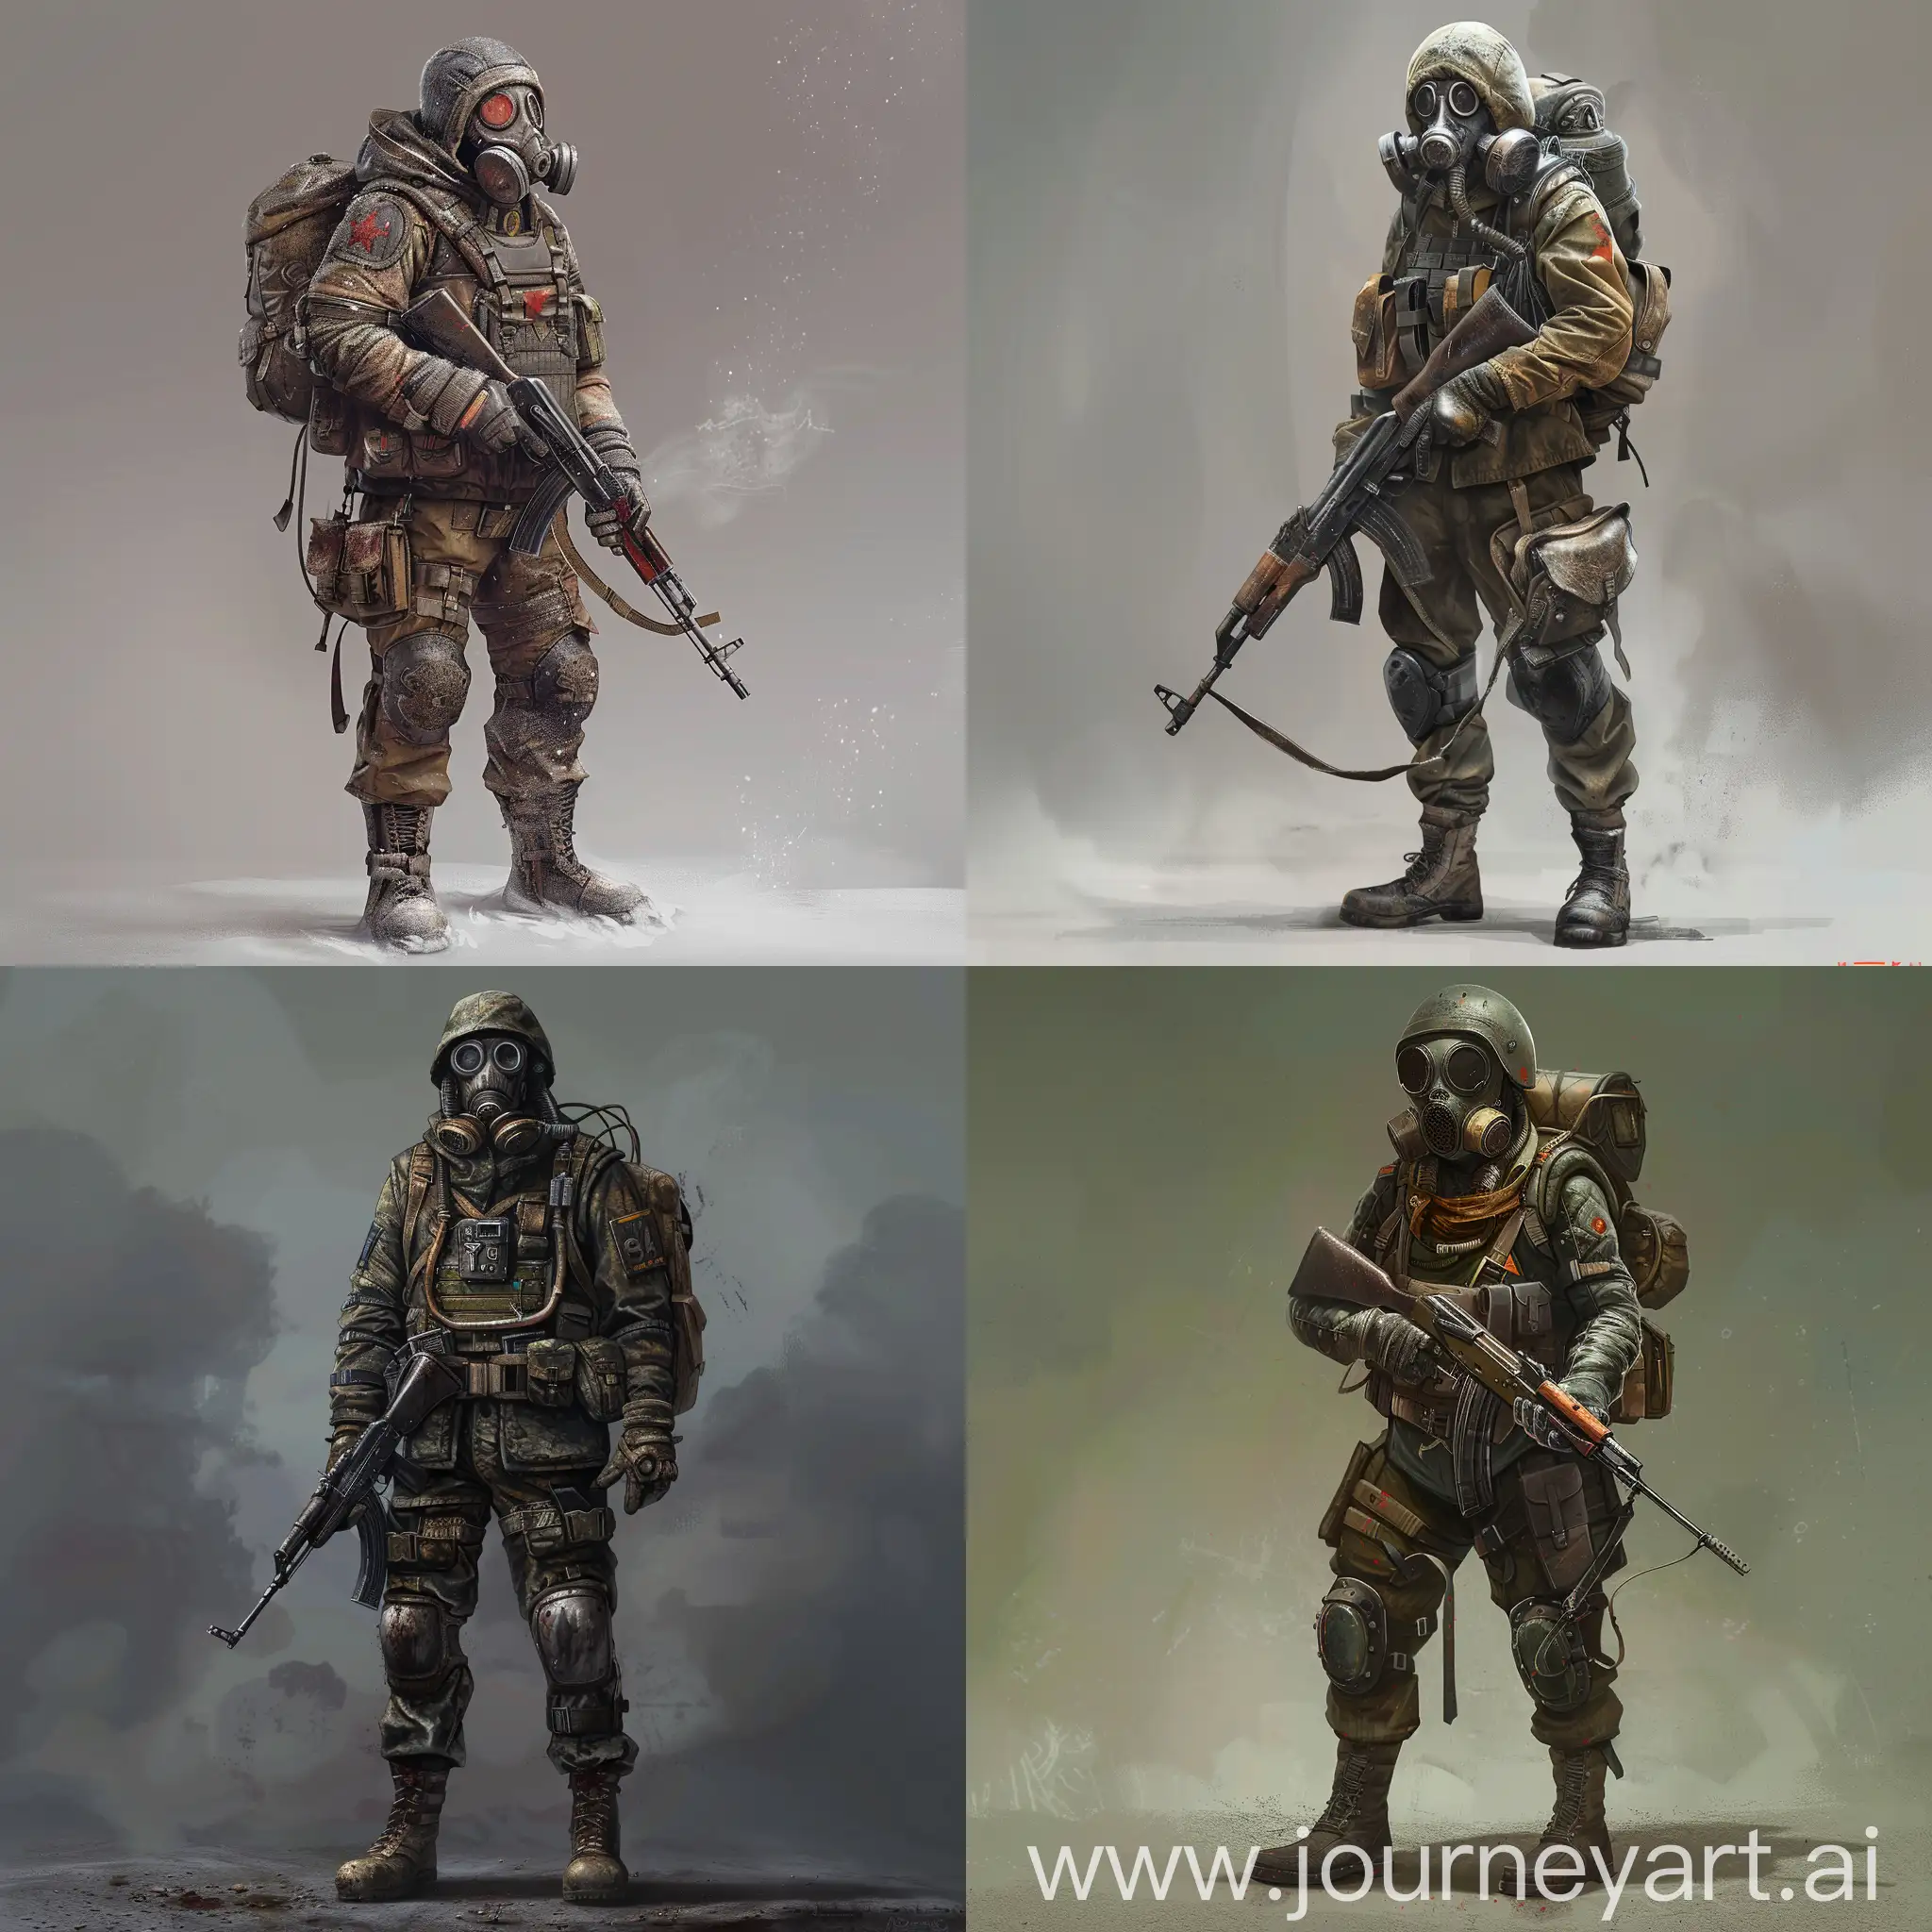 concept design art of the character, a ranger of the Order of Sparta from the Metro 2033 universe in full armor of against radiation danger, in a gasmask from the Soviet era, in his hands an AK-47, on his back a small military backpack.